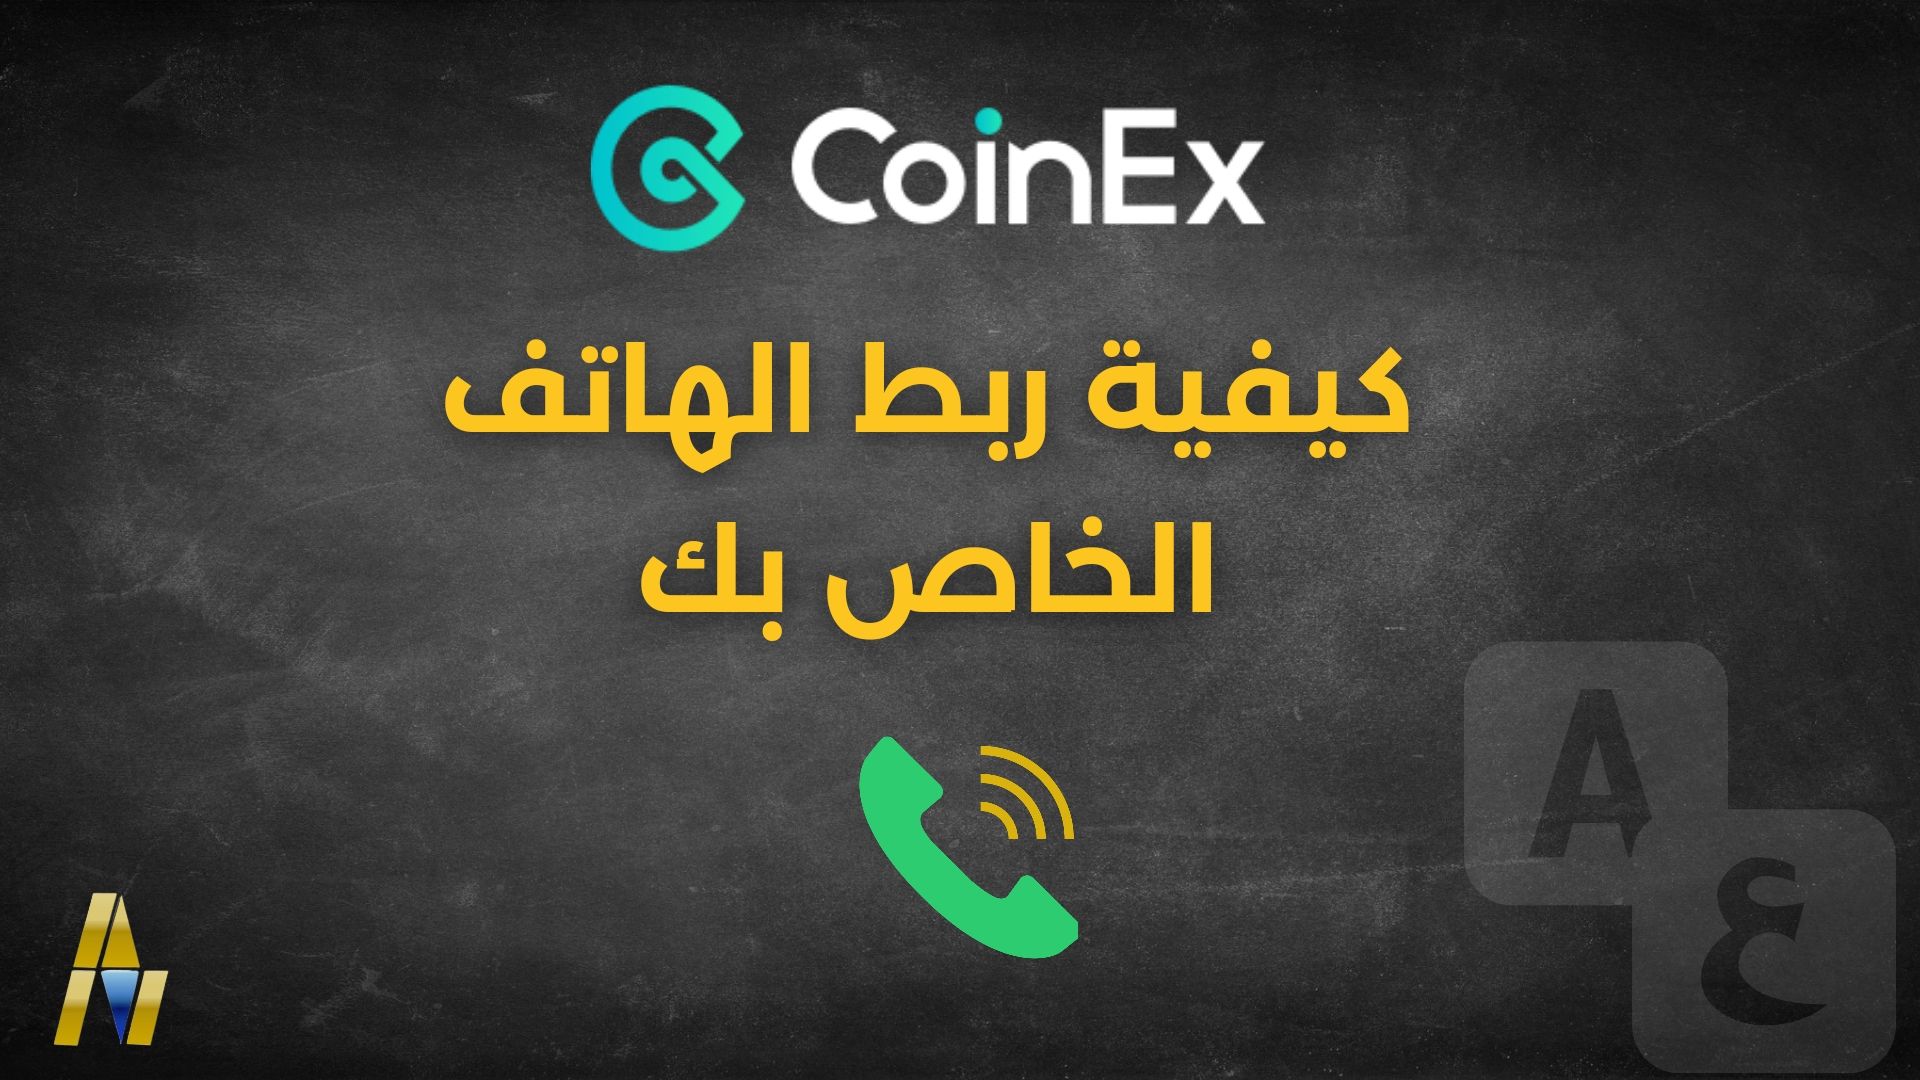 CoinEx connect phone number to account